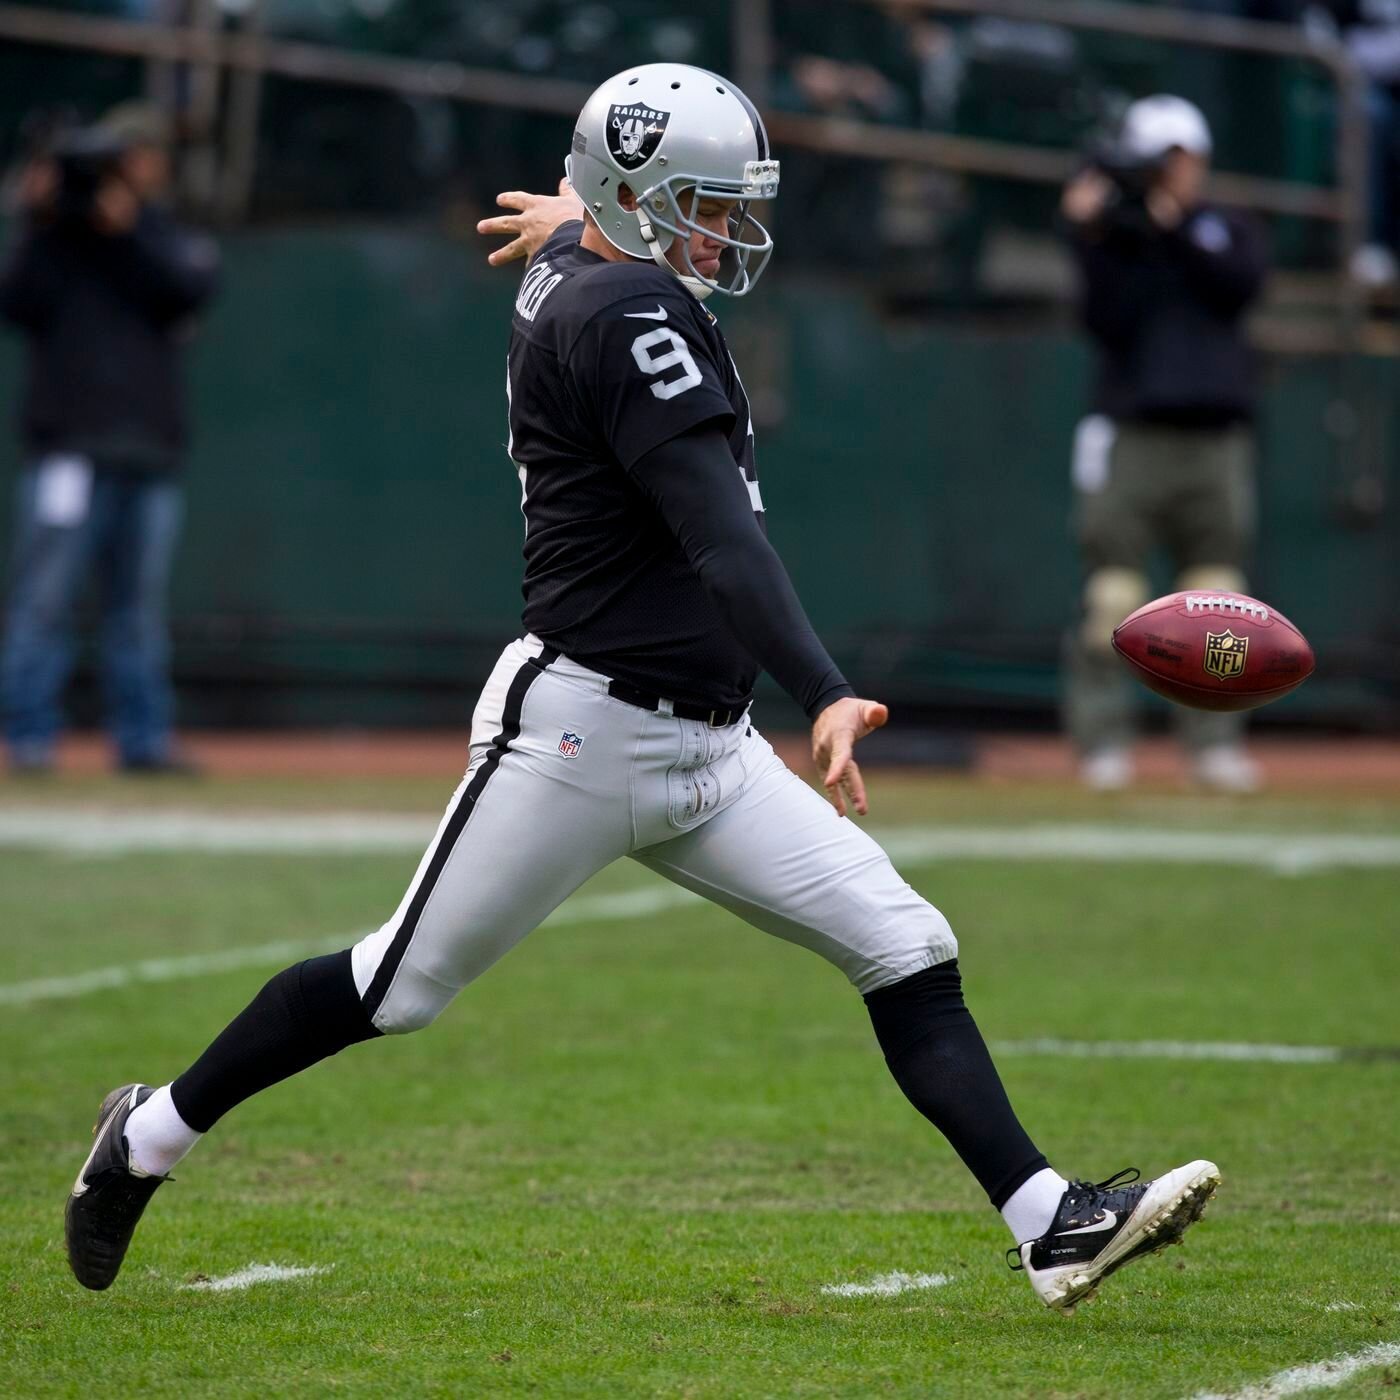 LKMS Salute to Excellence: Shane Lechler
Today we celebrate a punters with amazing precision. Shane Lechler, the NFL's career punting yards leader, showed us what it means to combine power with precision. Shane was selected in the 5th round of the 20